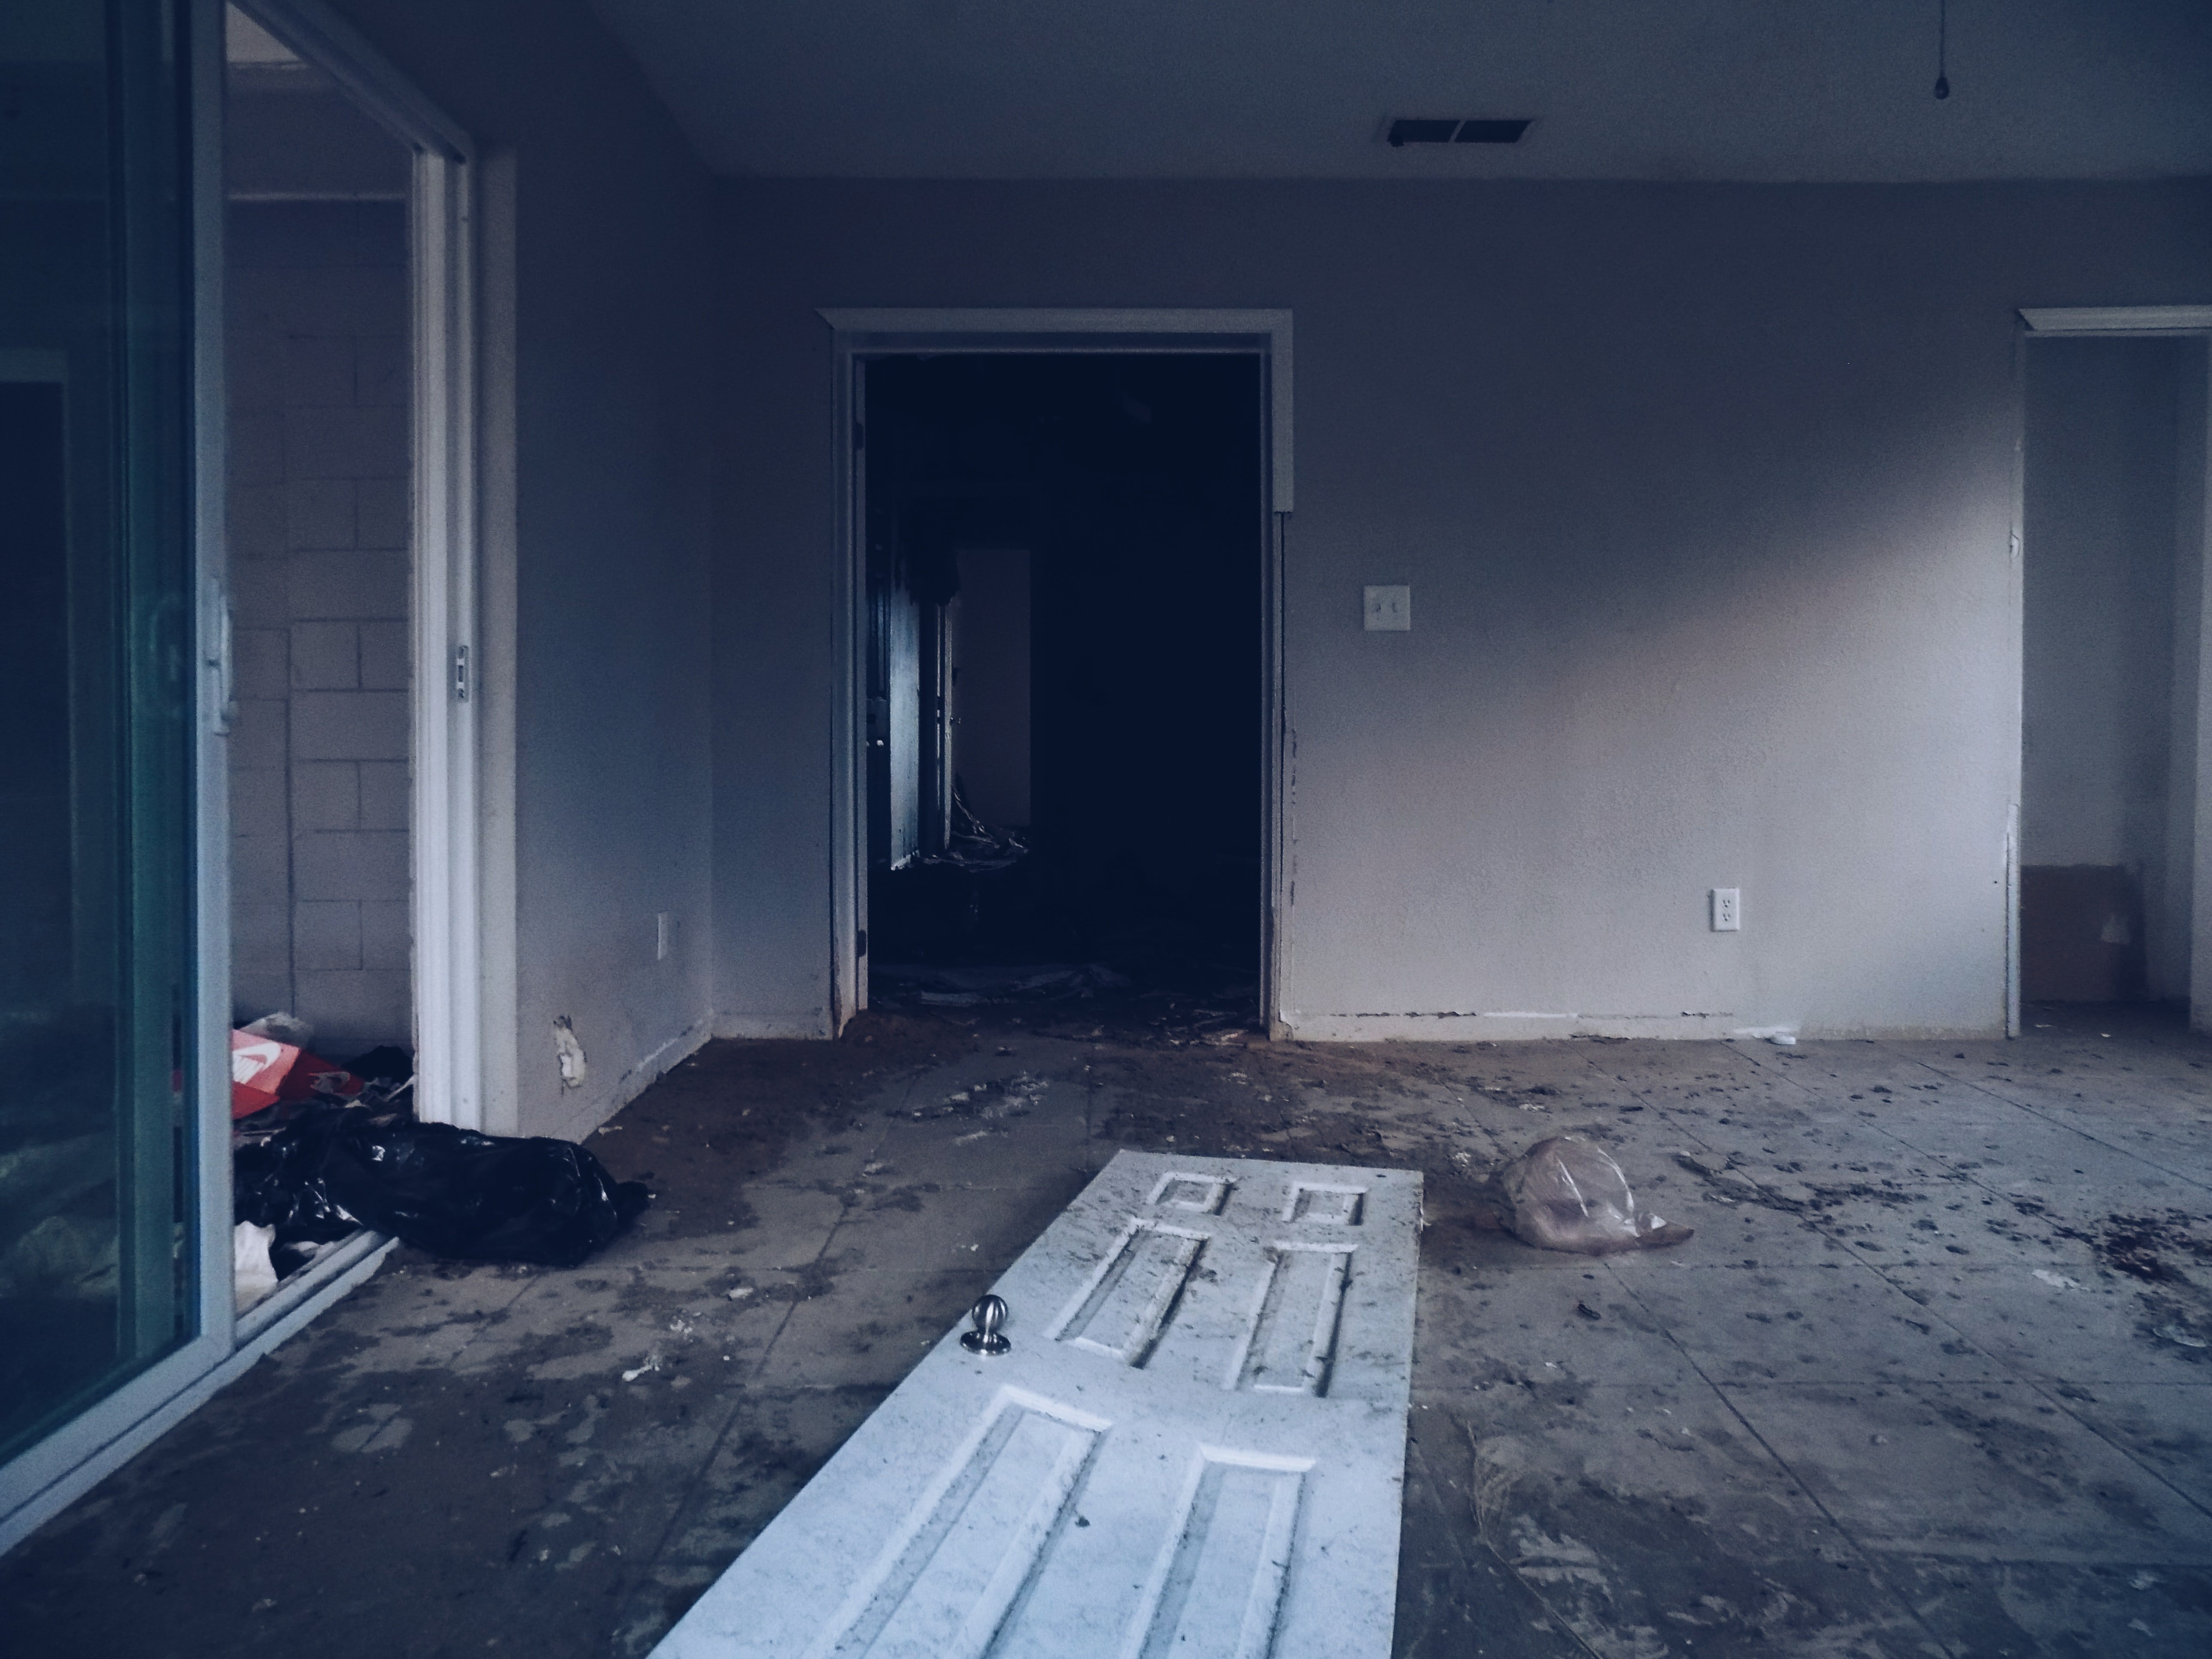 Mrs. Davis' house was in a terrible state | Photo: Unsplash